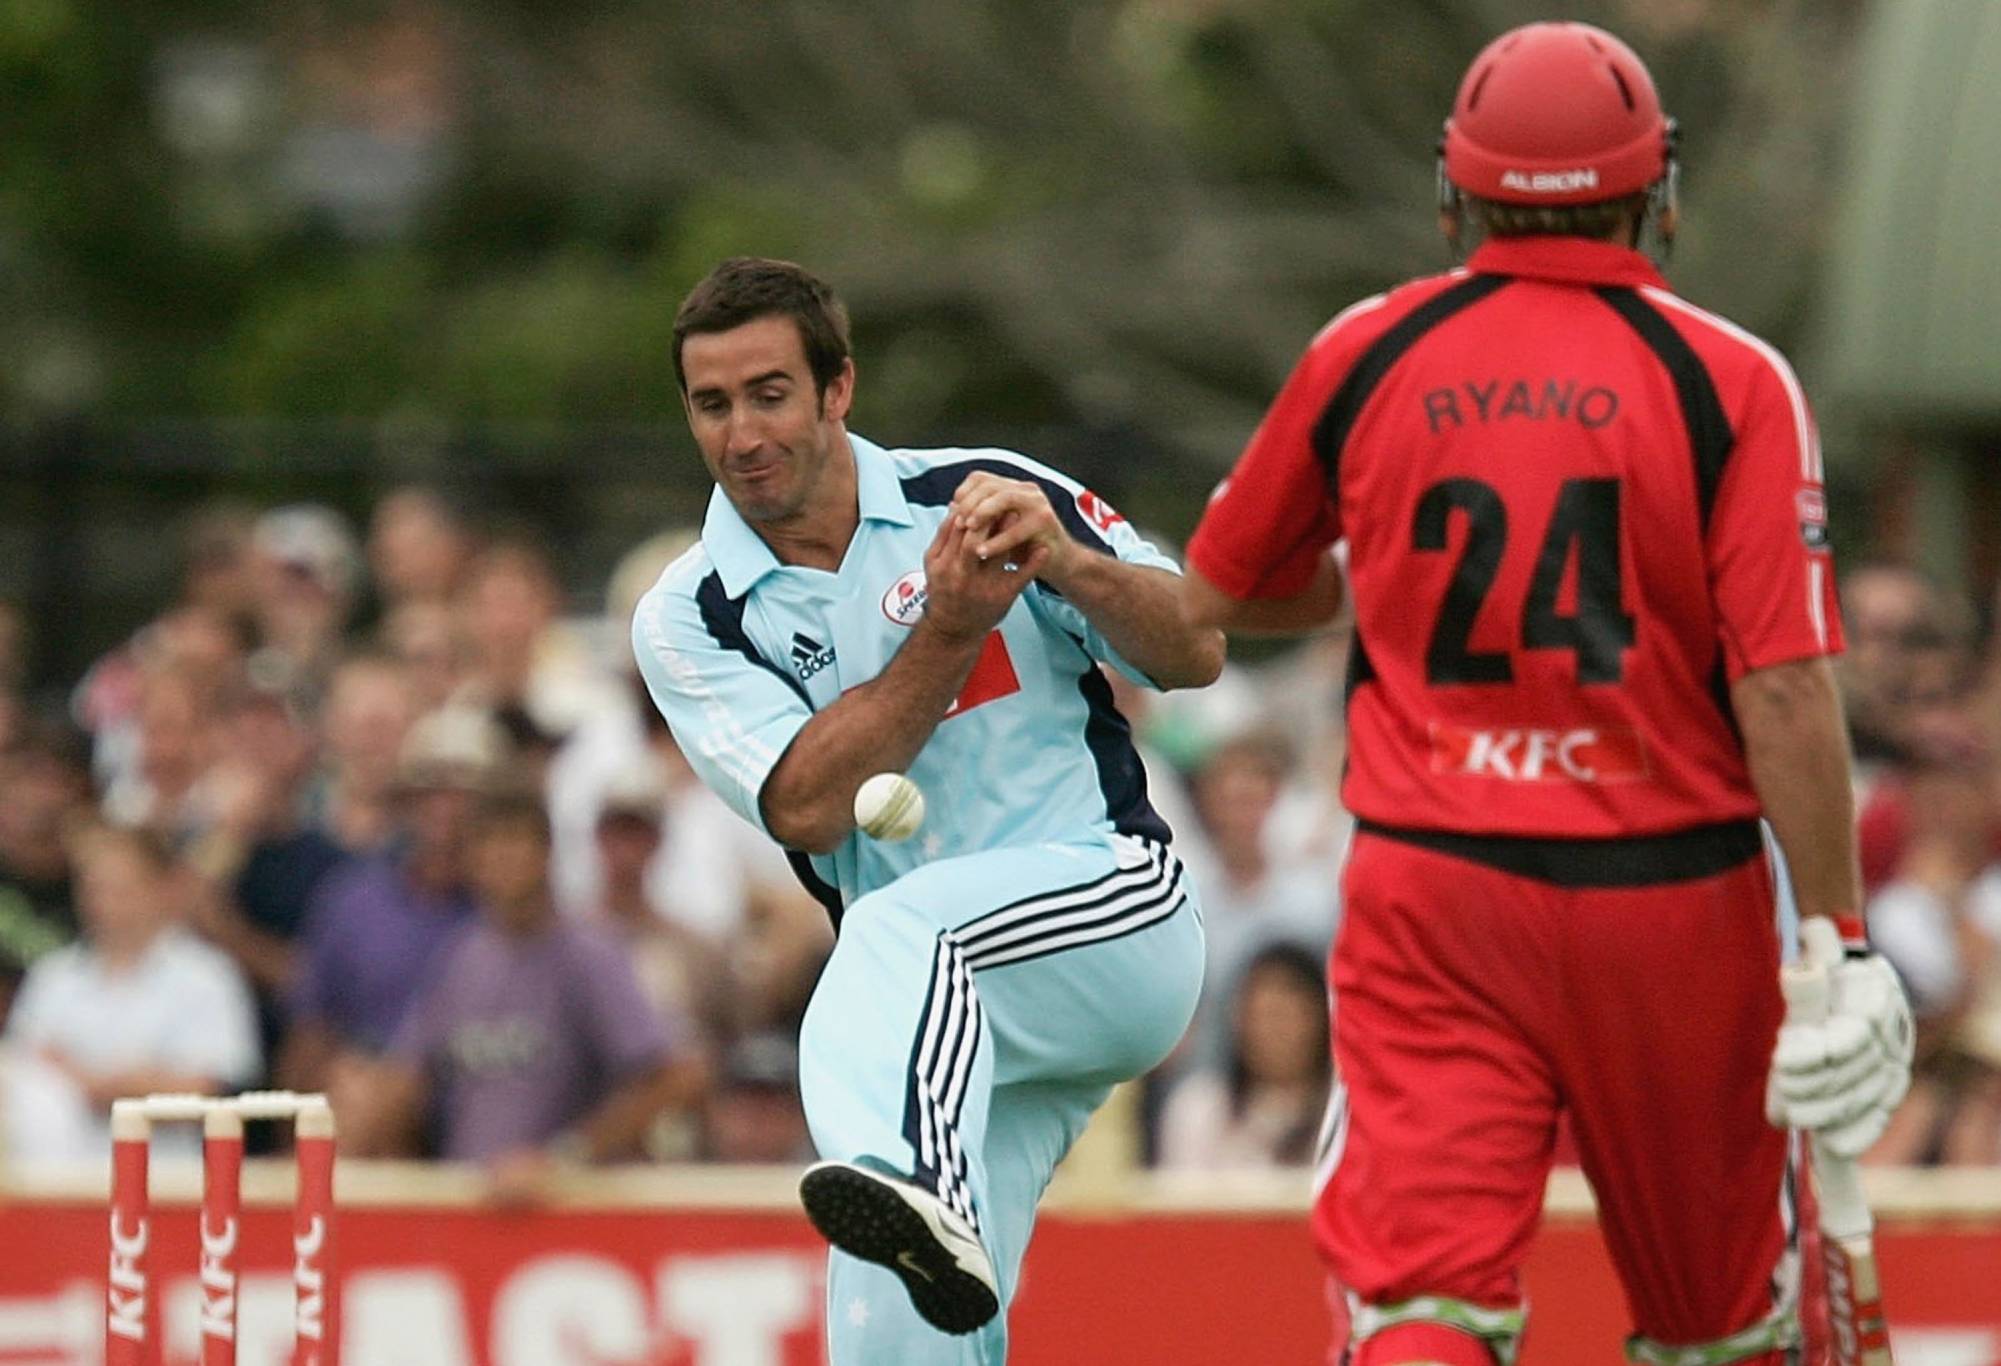 NEWCASTLE, AUSTRALIA - JANUARY 07:  Andrew Johns of the Blues in action during the Twenty20 Big Bash one day match between the New South Wales Blues and the South Australian Redbacks at Newcastle No1 Sports Ground January 7, 2007 in Newcastle, Australia.  (Photo by Corey Davis/Getty Images)